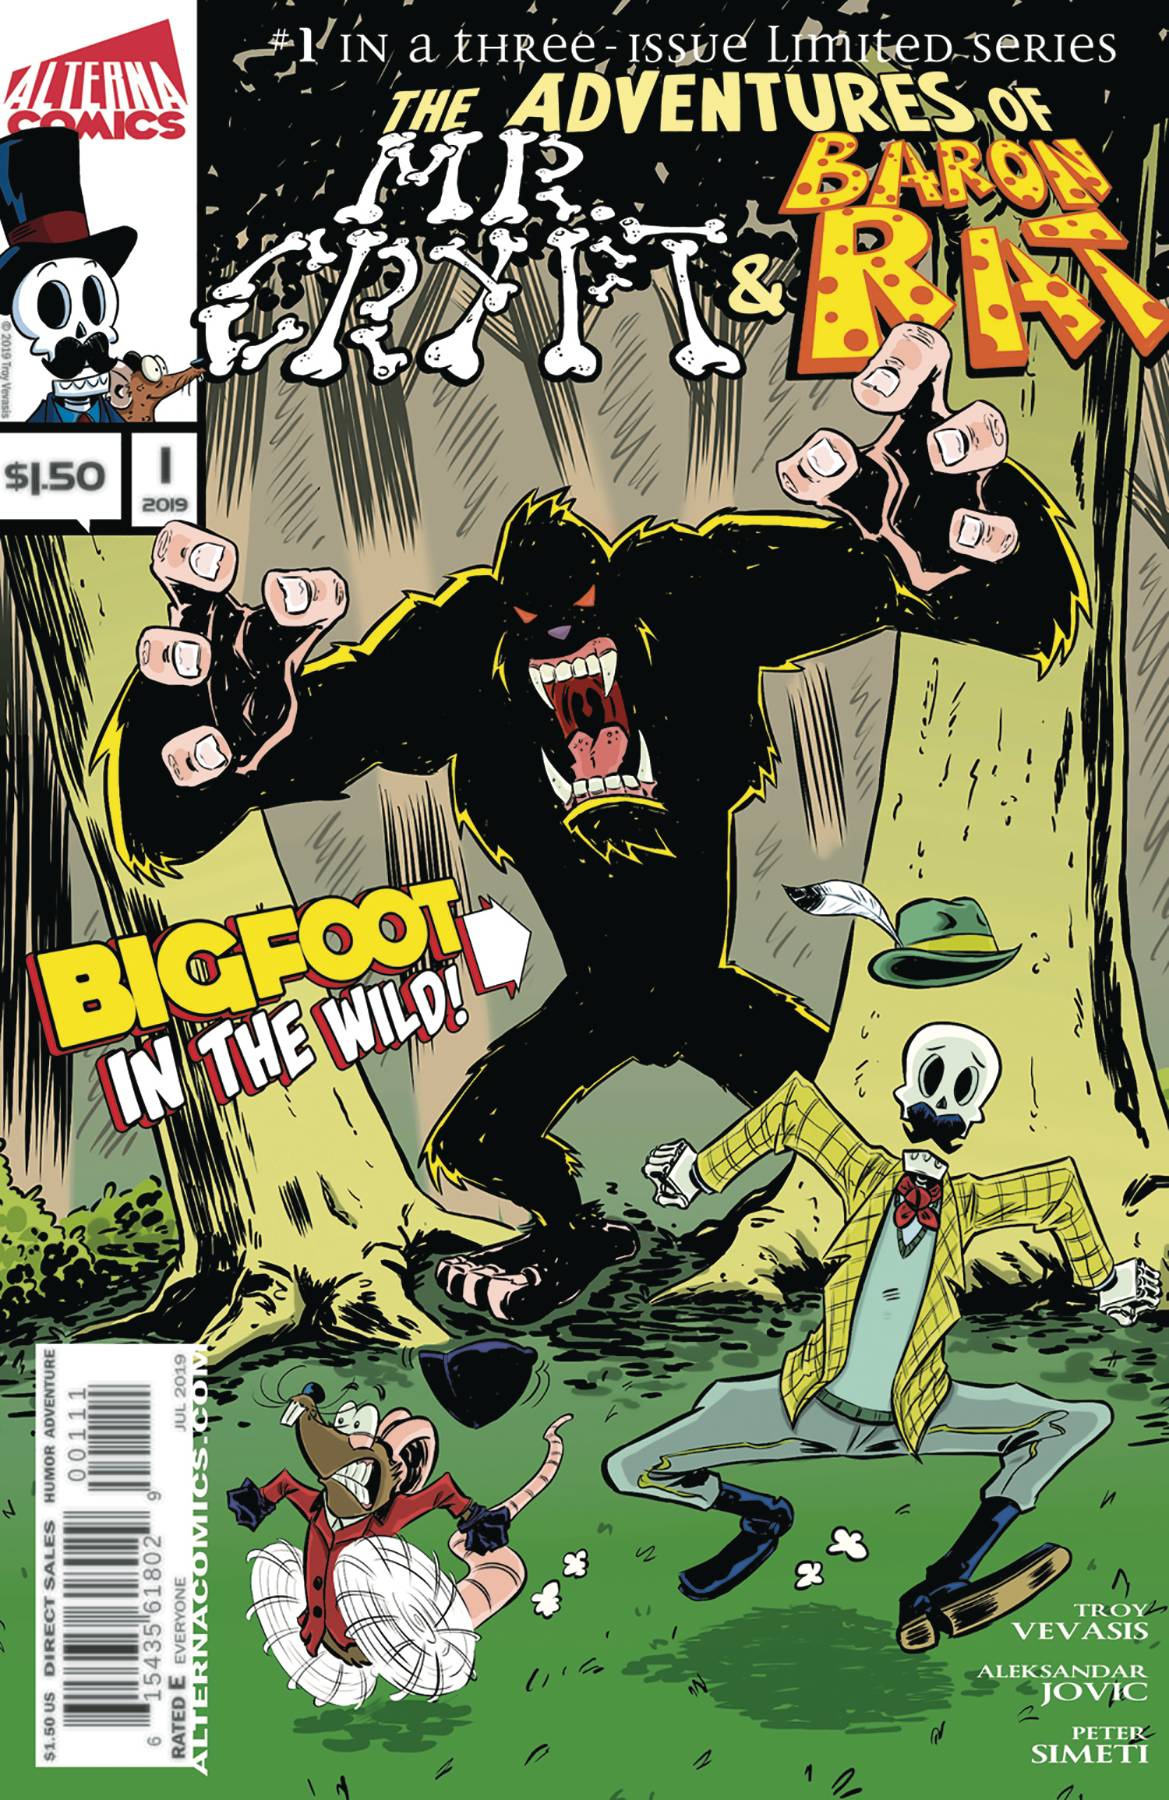 The Adventures Of Mr Crypt & Baron Rat #1 (2019)